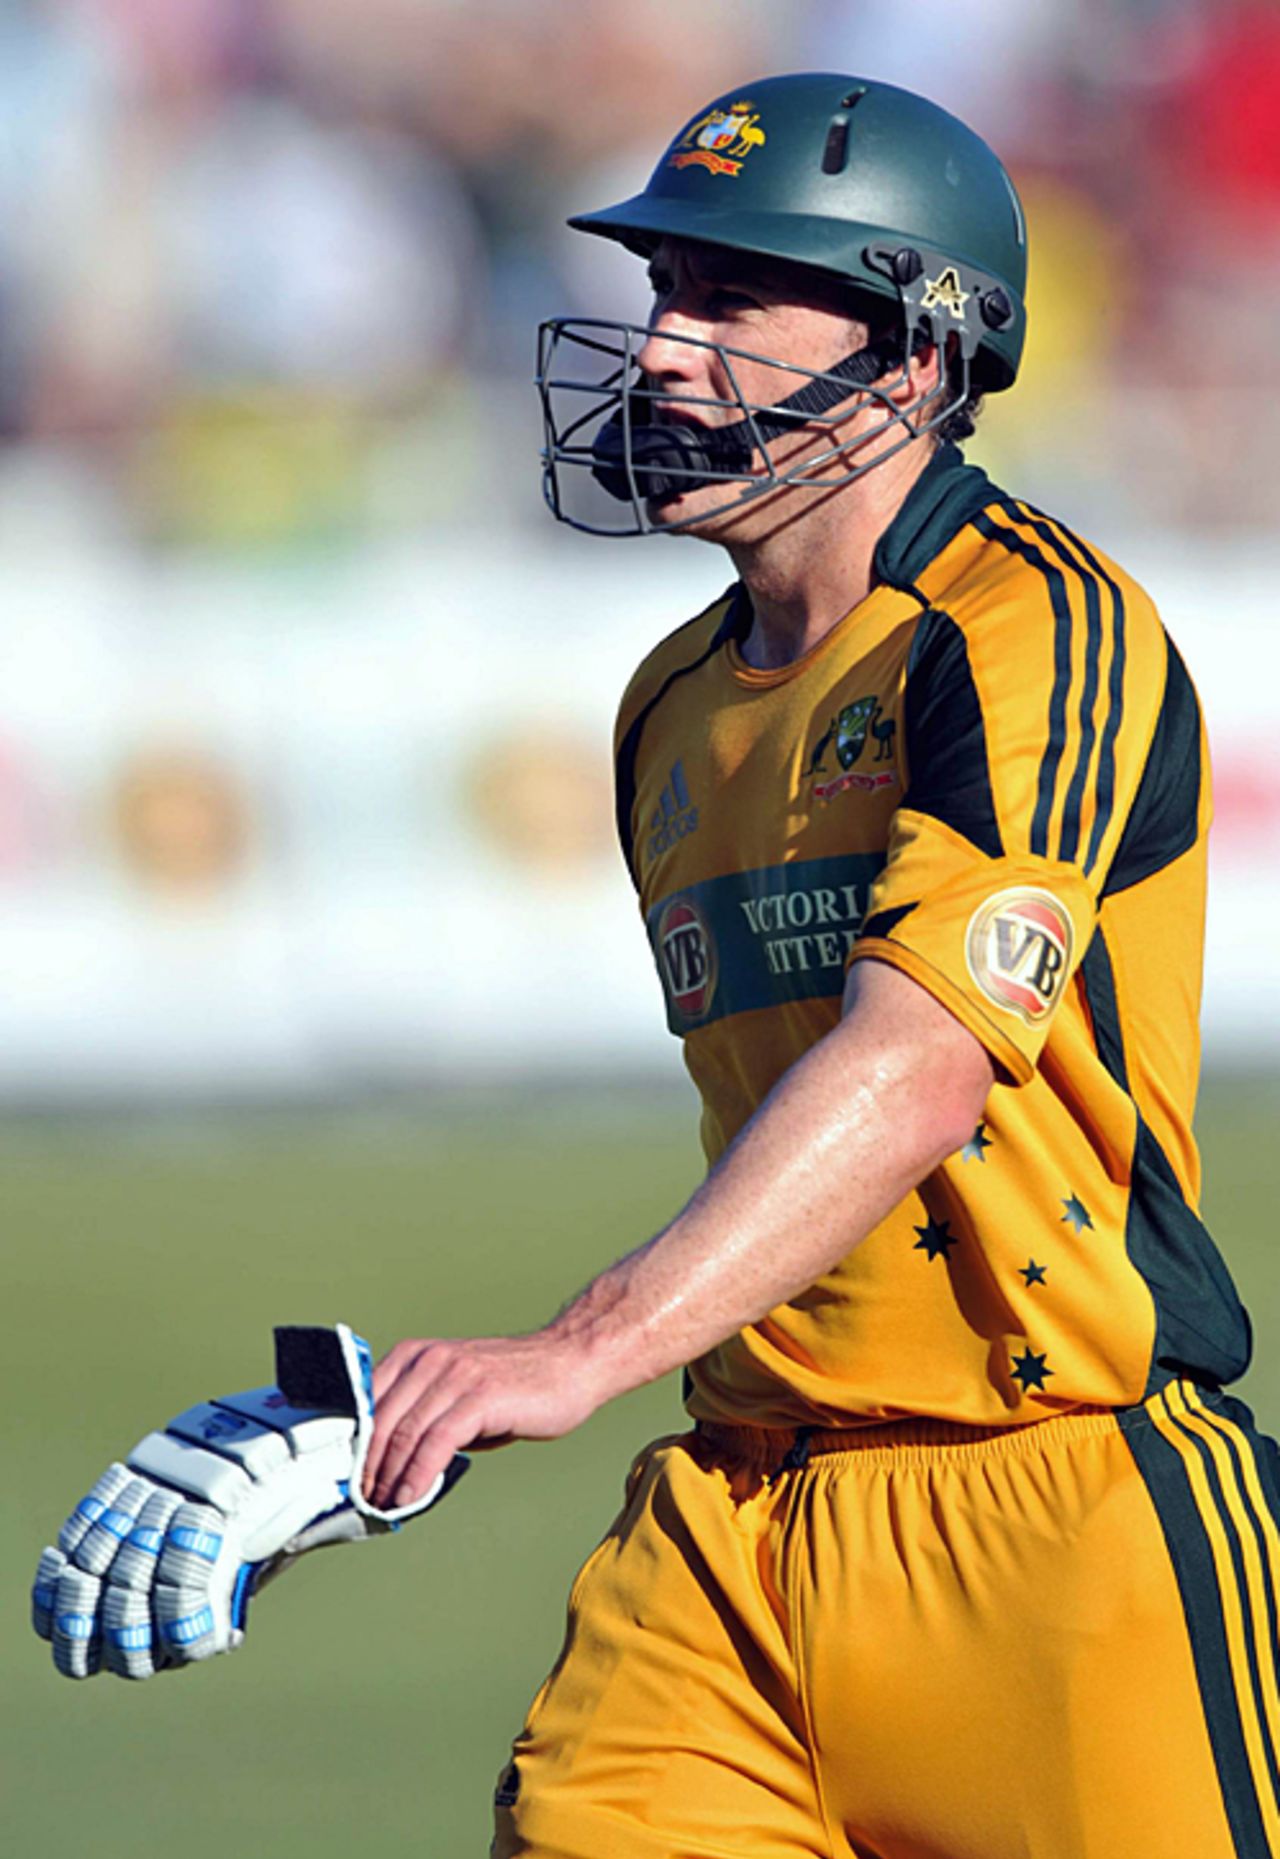 A disappointed David Hussey heads back to the pavilion, South Africa v Australia, 1st ODI, Durban, April 3, 2009